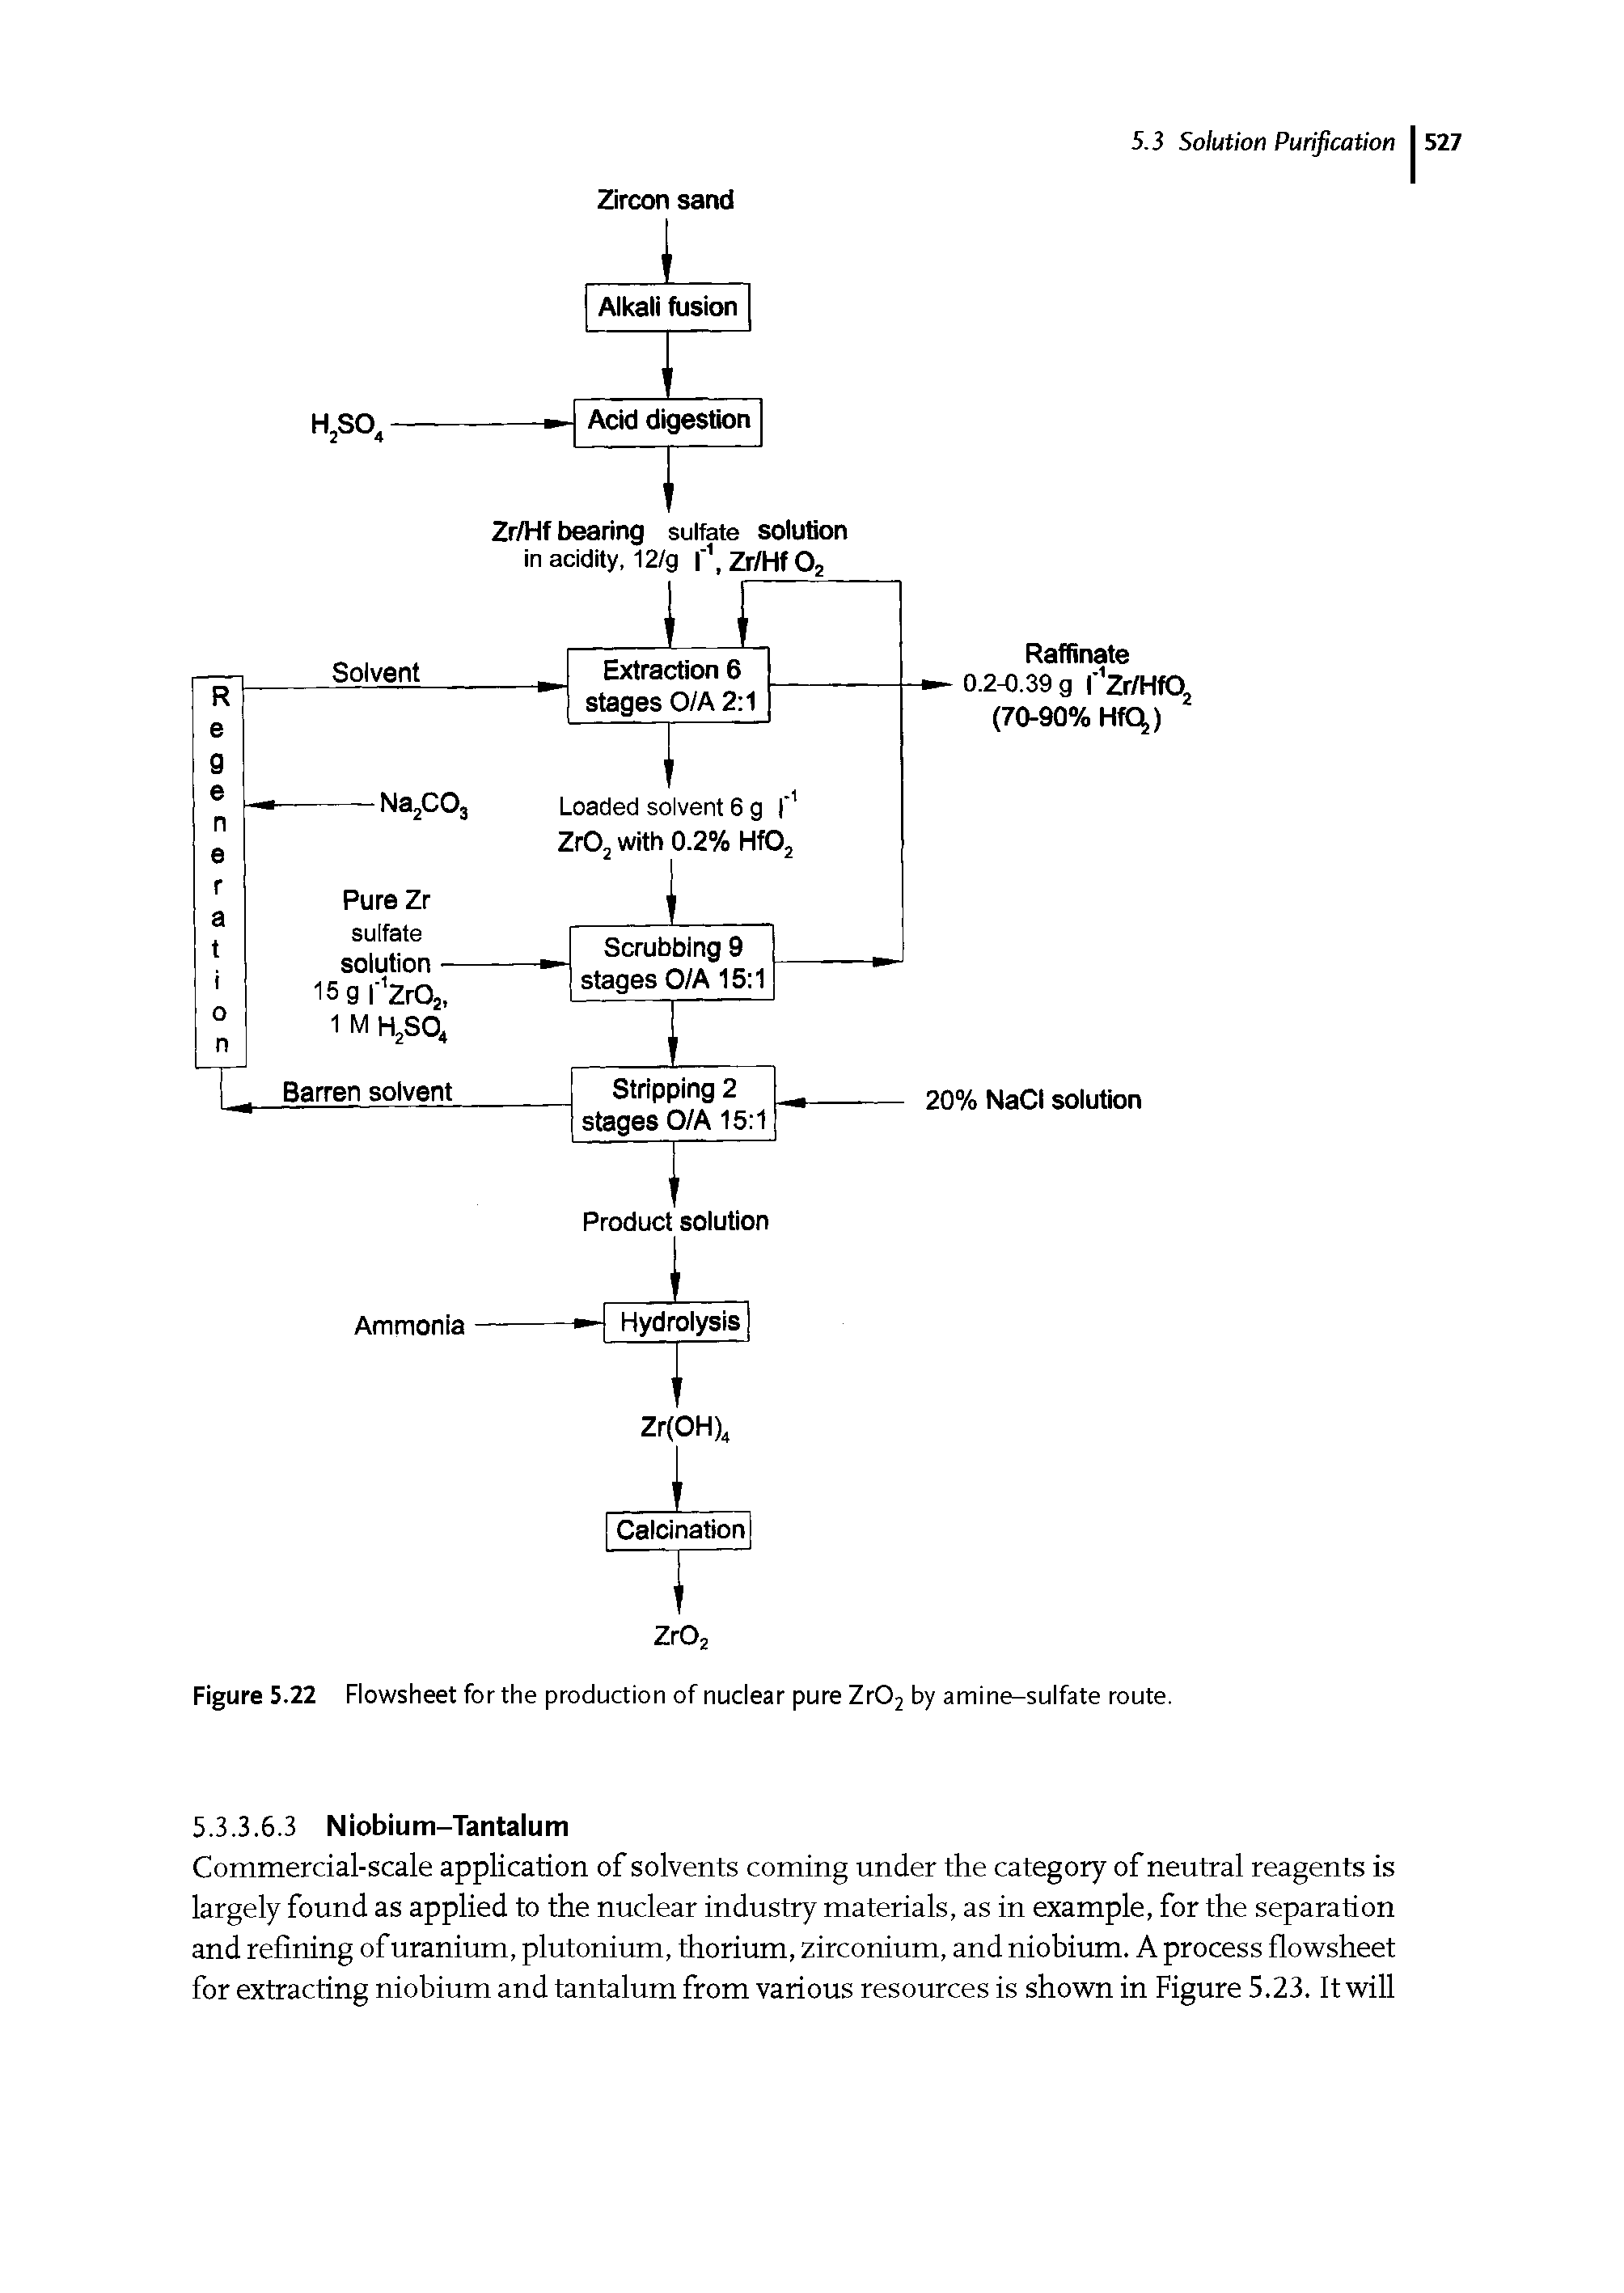 Figure 5.22 Flowsheet for the production of nuclear pure Zr02 by amine-sulfate route.